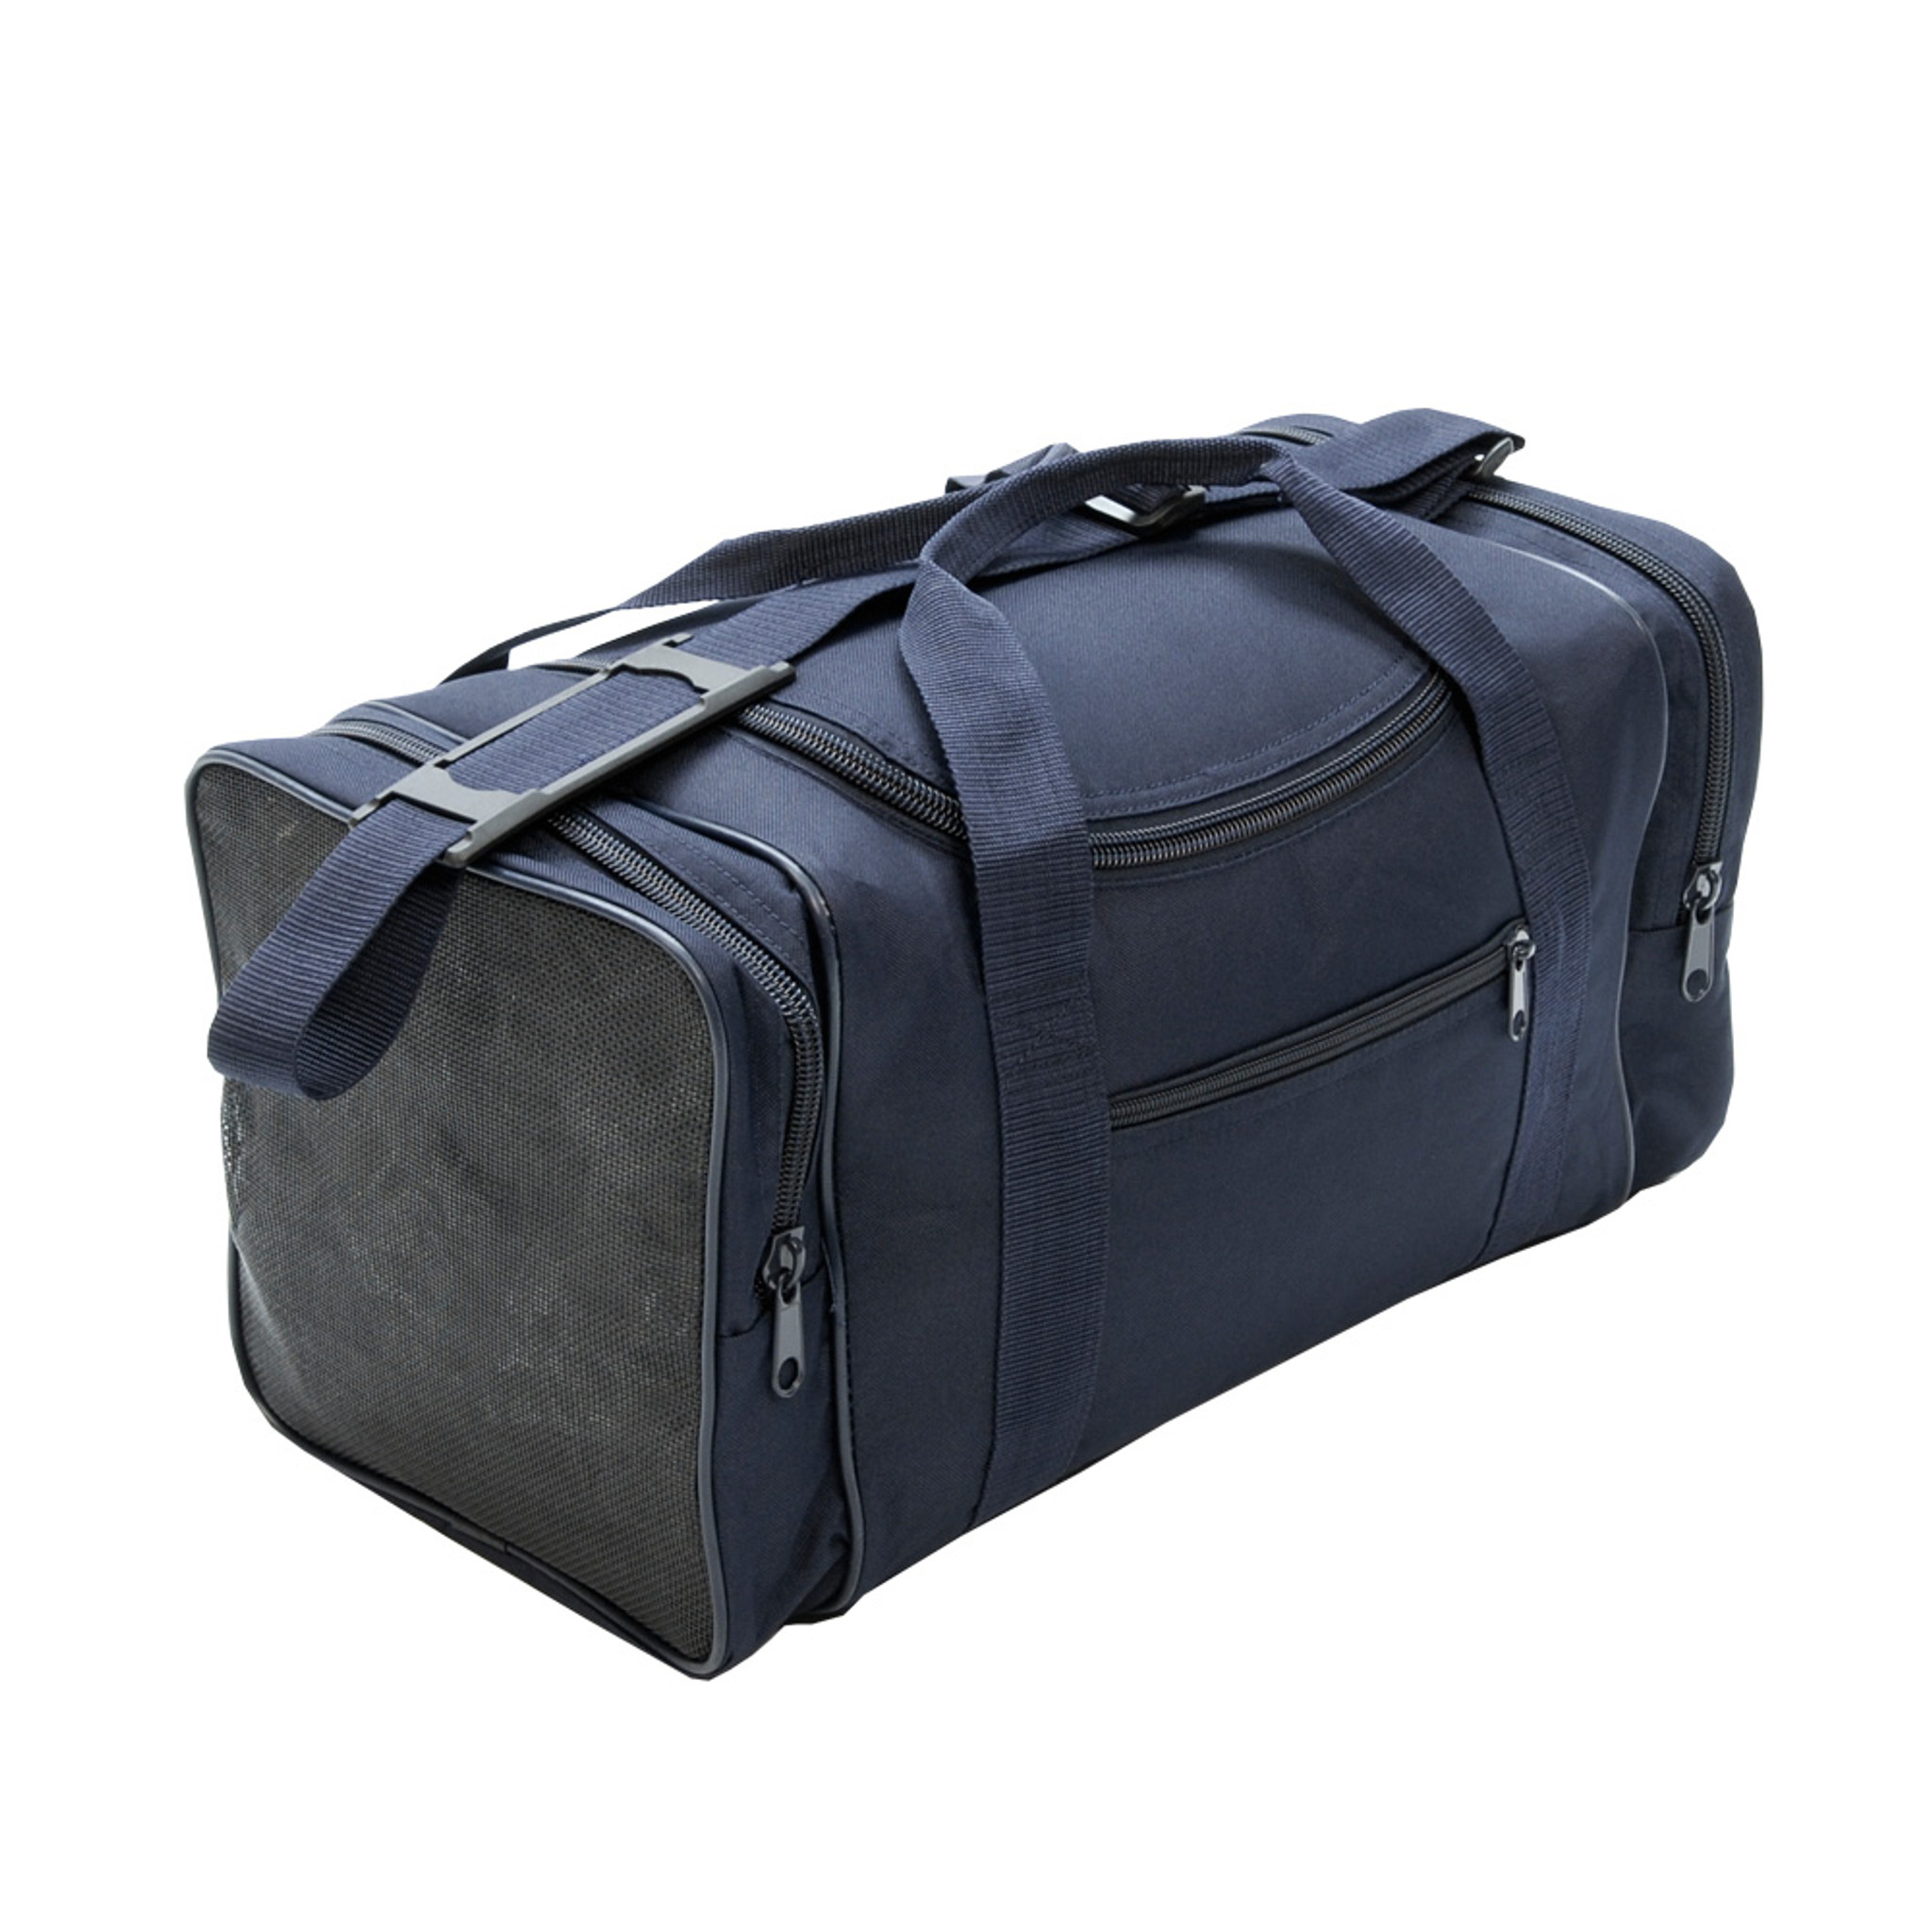 Gear Duffle Bag, Small to Large Sizes